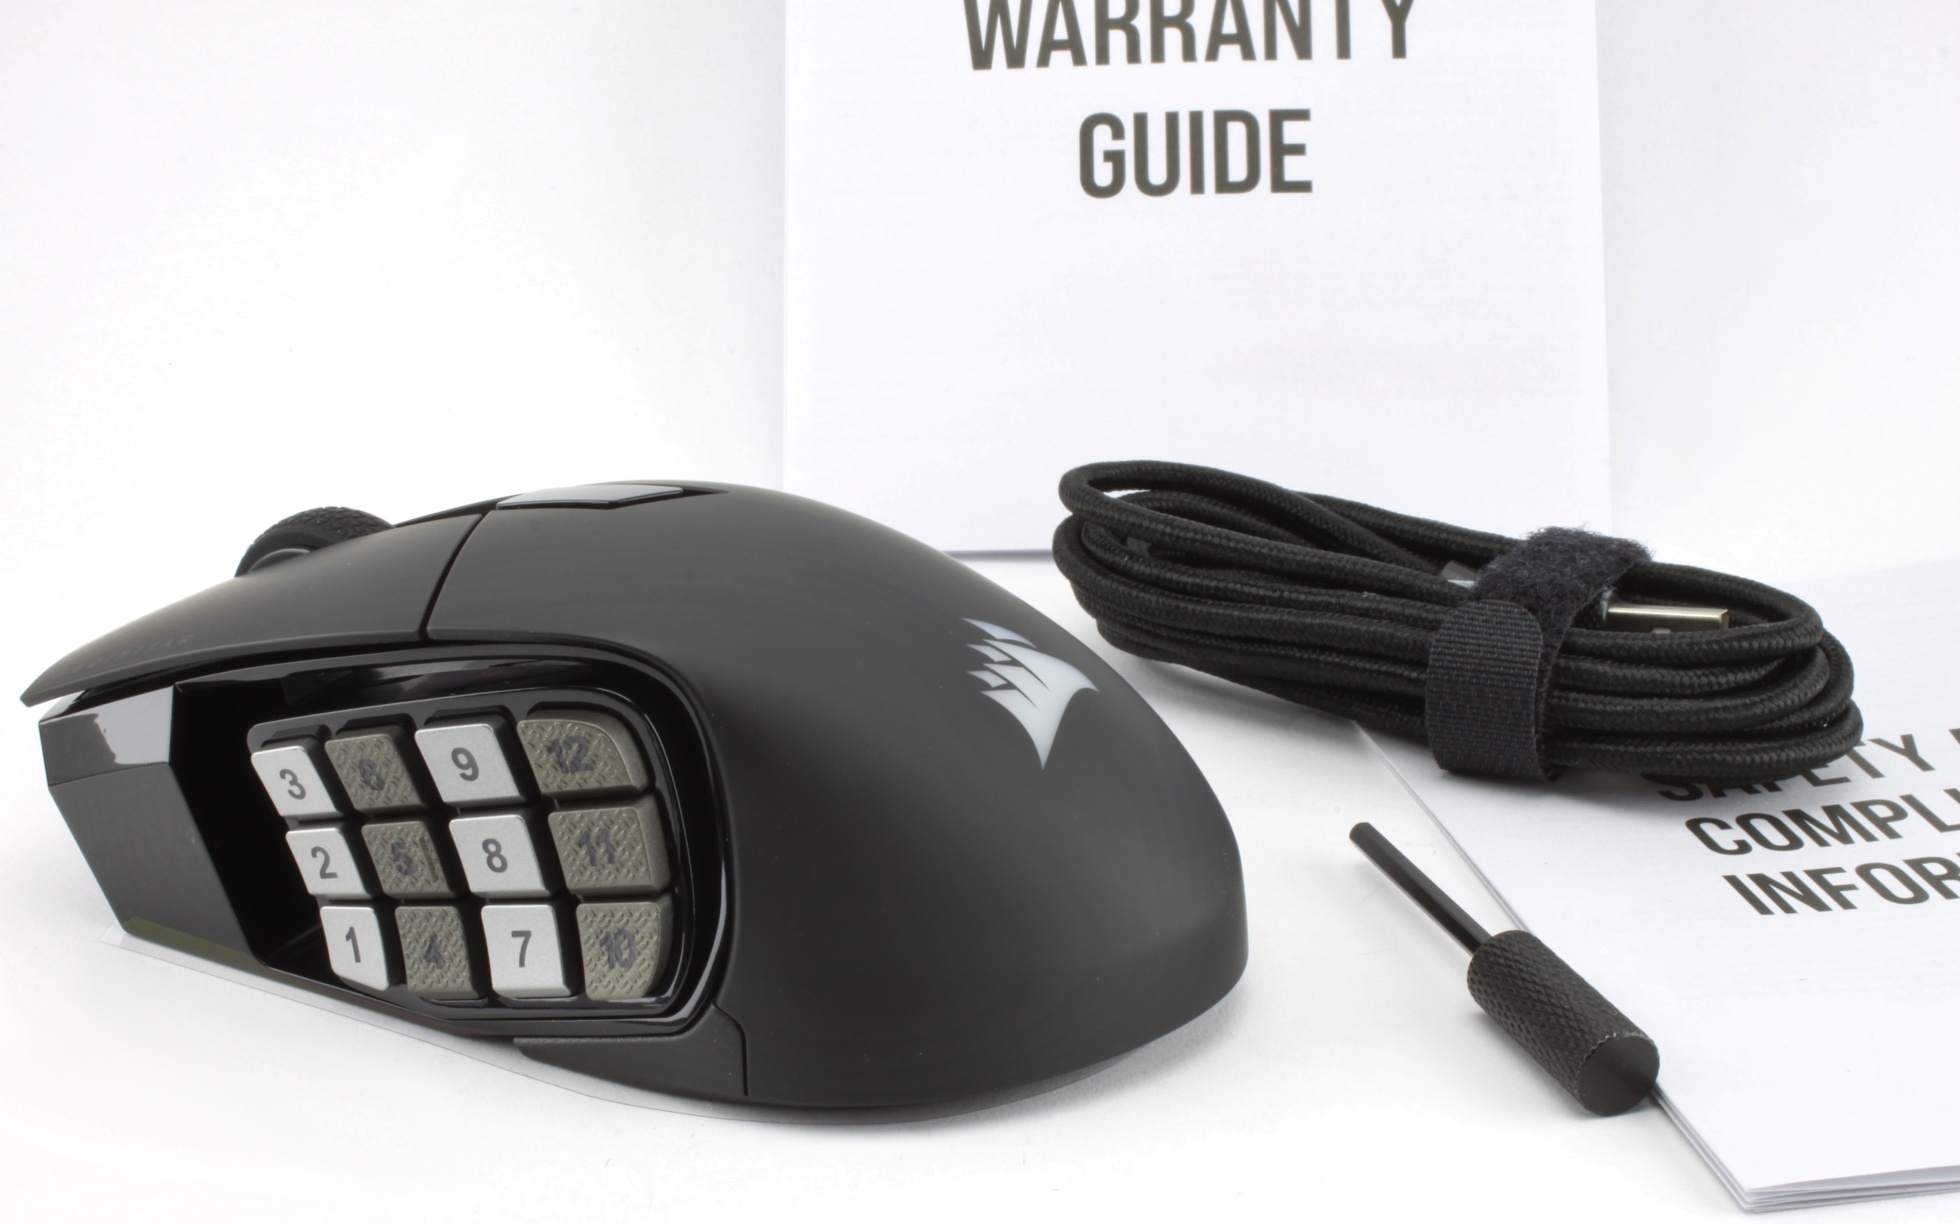 MMO side Slightly buttons | CORSAIR Wireless SCIMITAR with - obese Elite mouse igor´sLAB sliding wireless Review